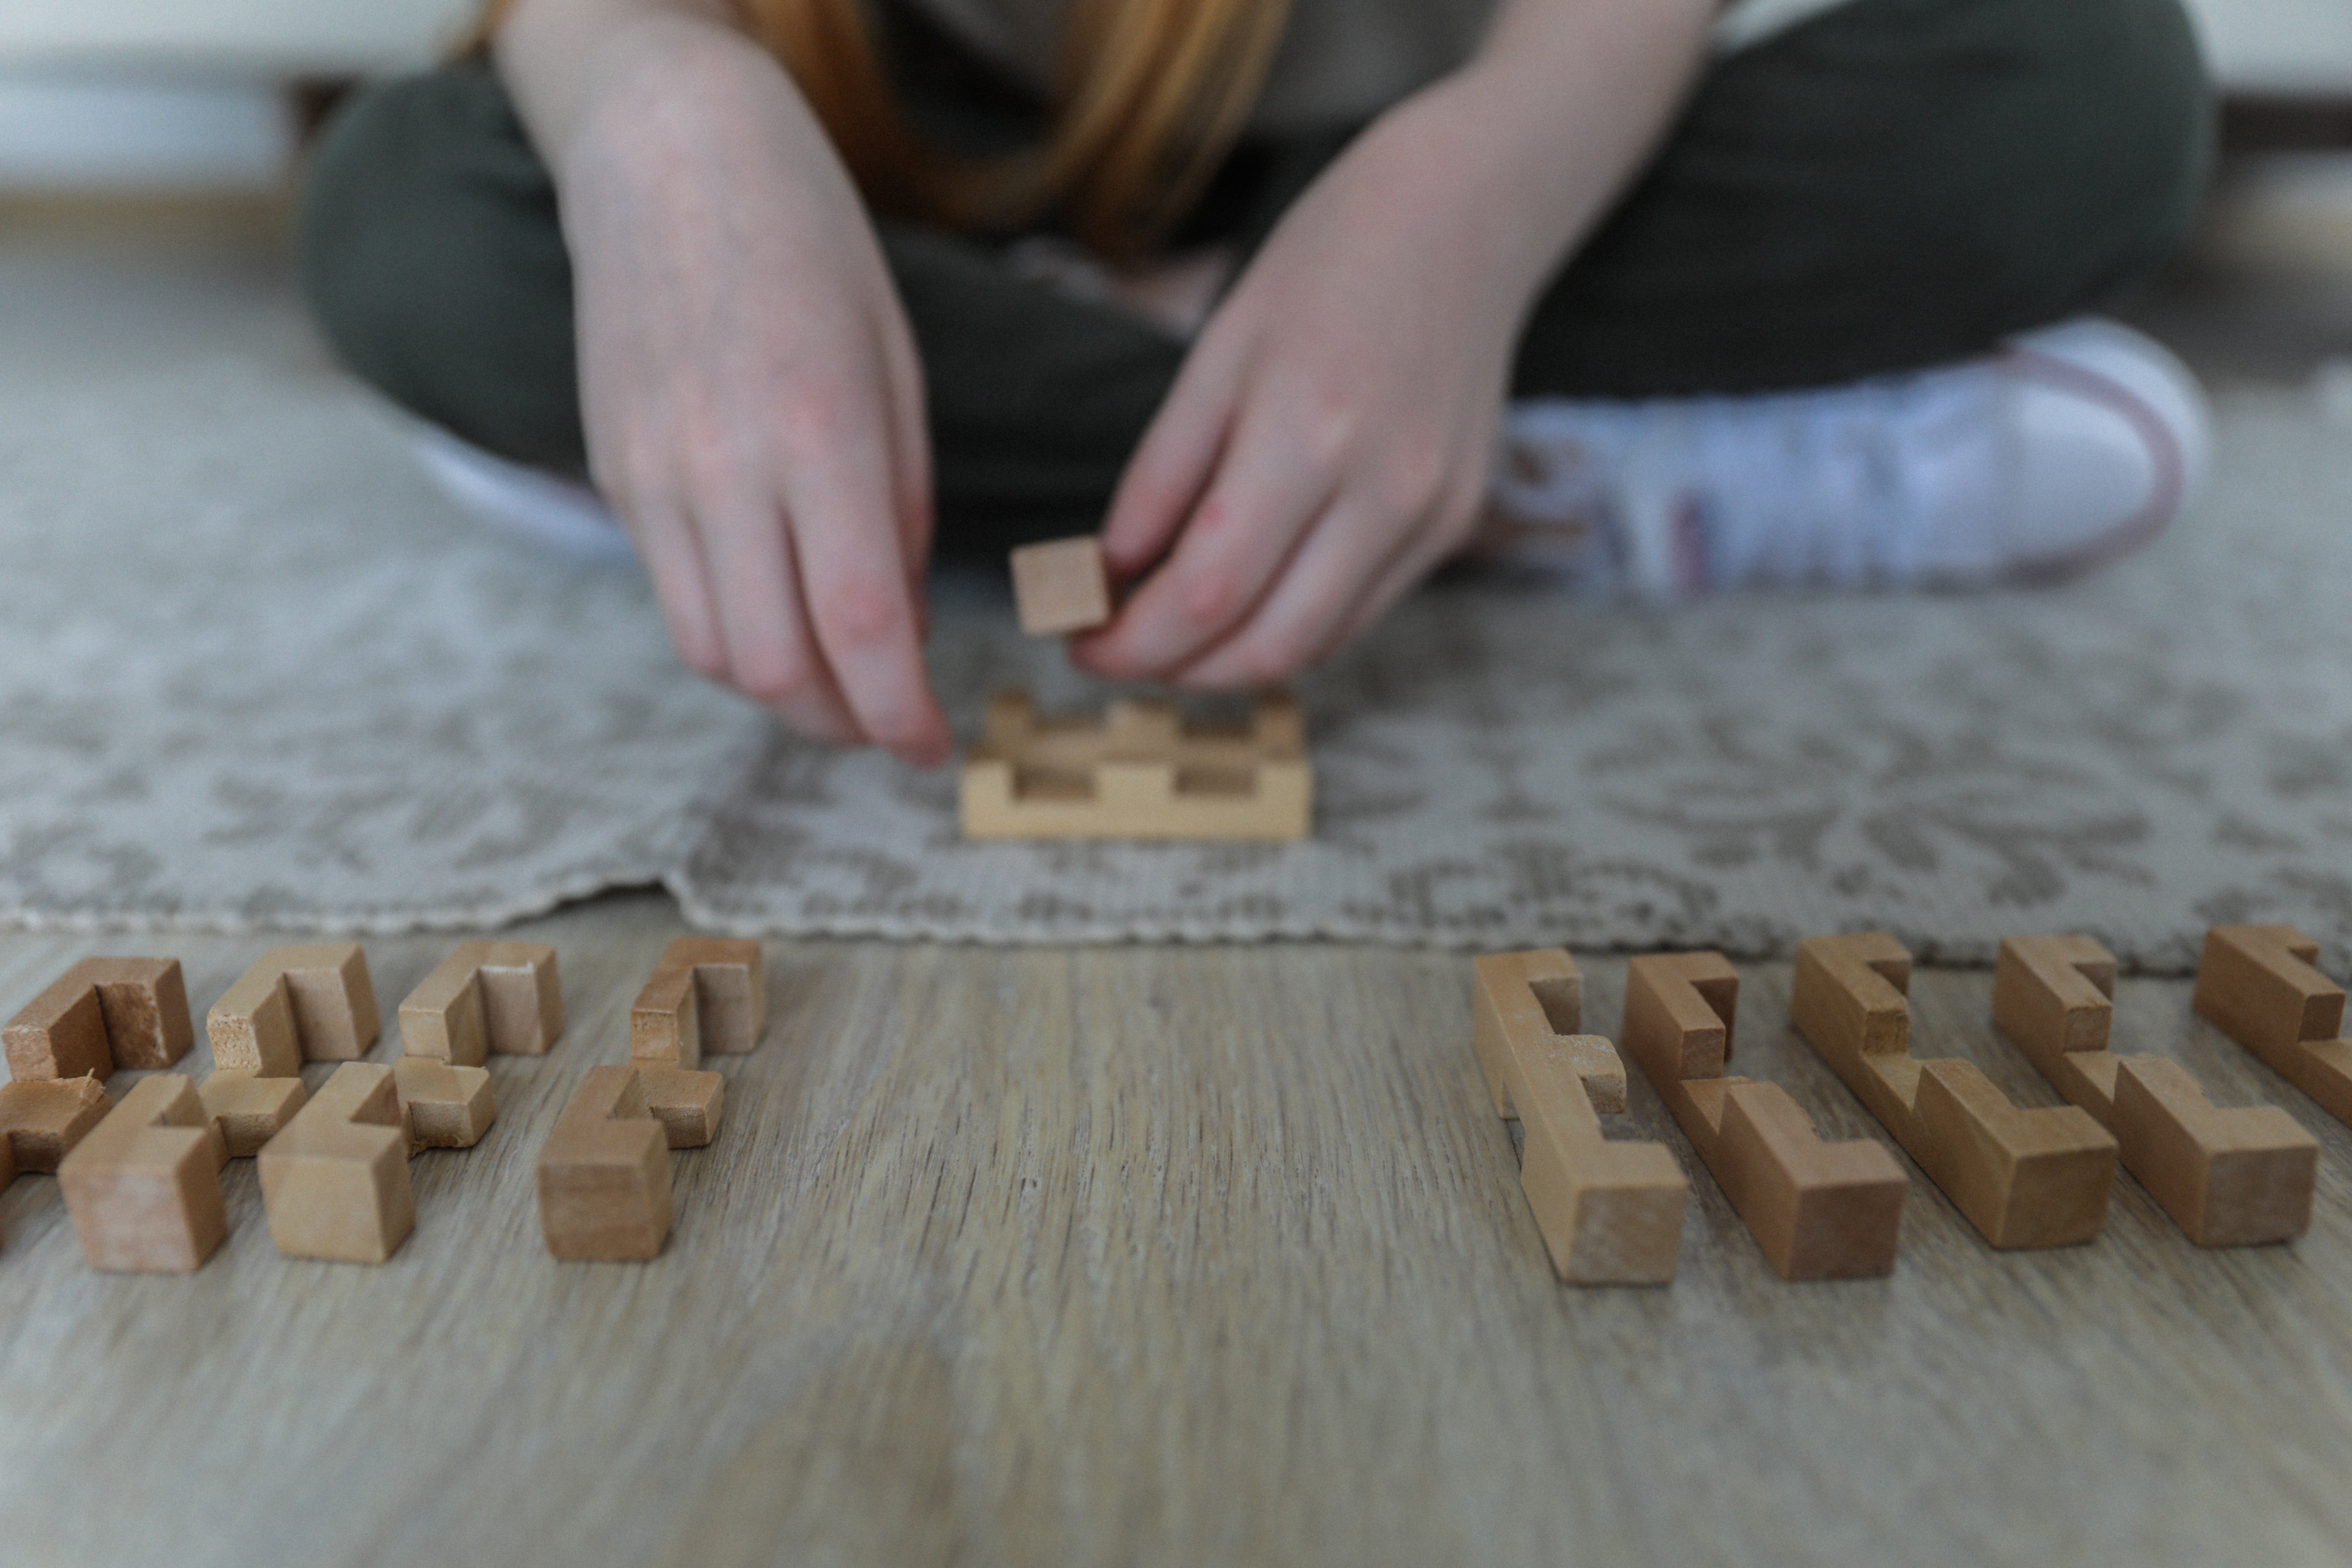 A girl attempts to make sense of wooden puzzle blocks laid out in front of her | Photo: Pexels/Monstera 